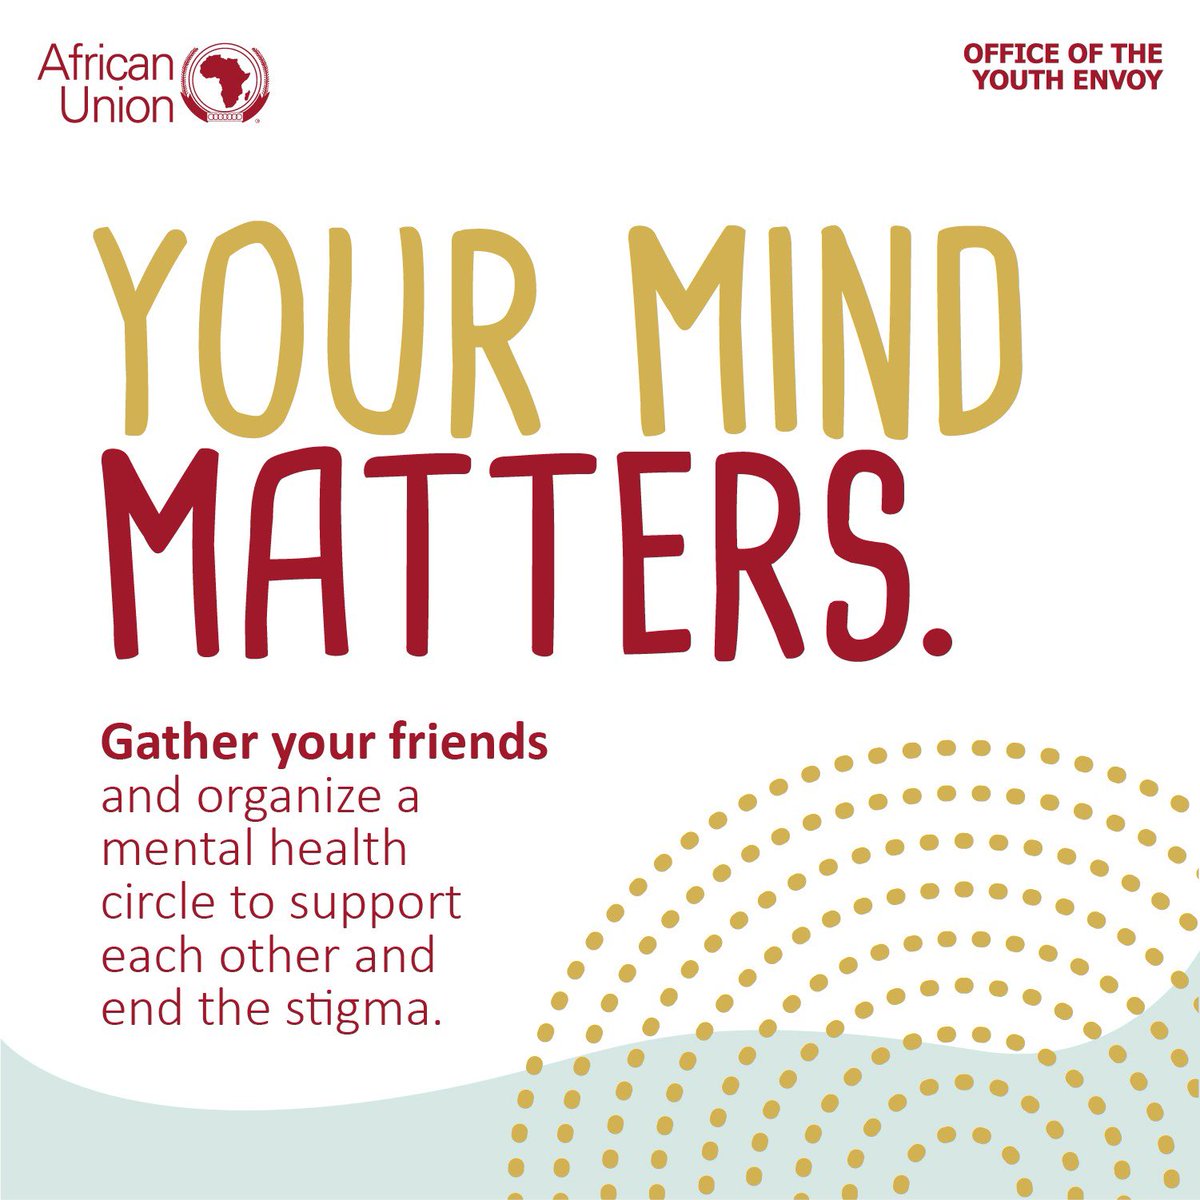 This Mental Health Awareness Month, gather your friends to host a mental health baraza. Create a safe space to support each other, end stigma & build resilience. Need guidance? The #ICANSurvive Toolkit can help you get started: beacons.ai/chidocleompemba